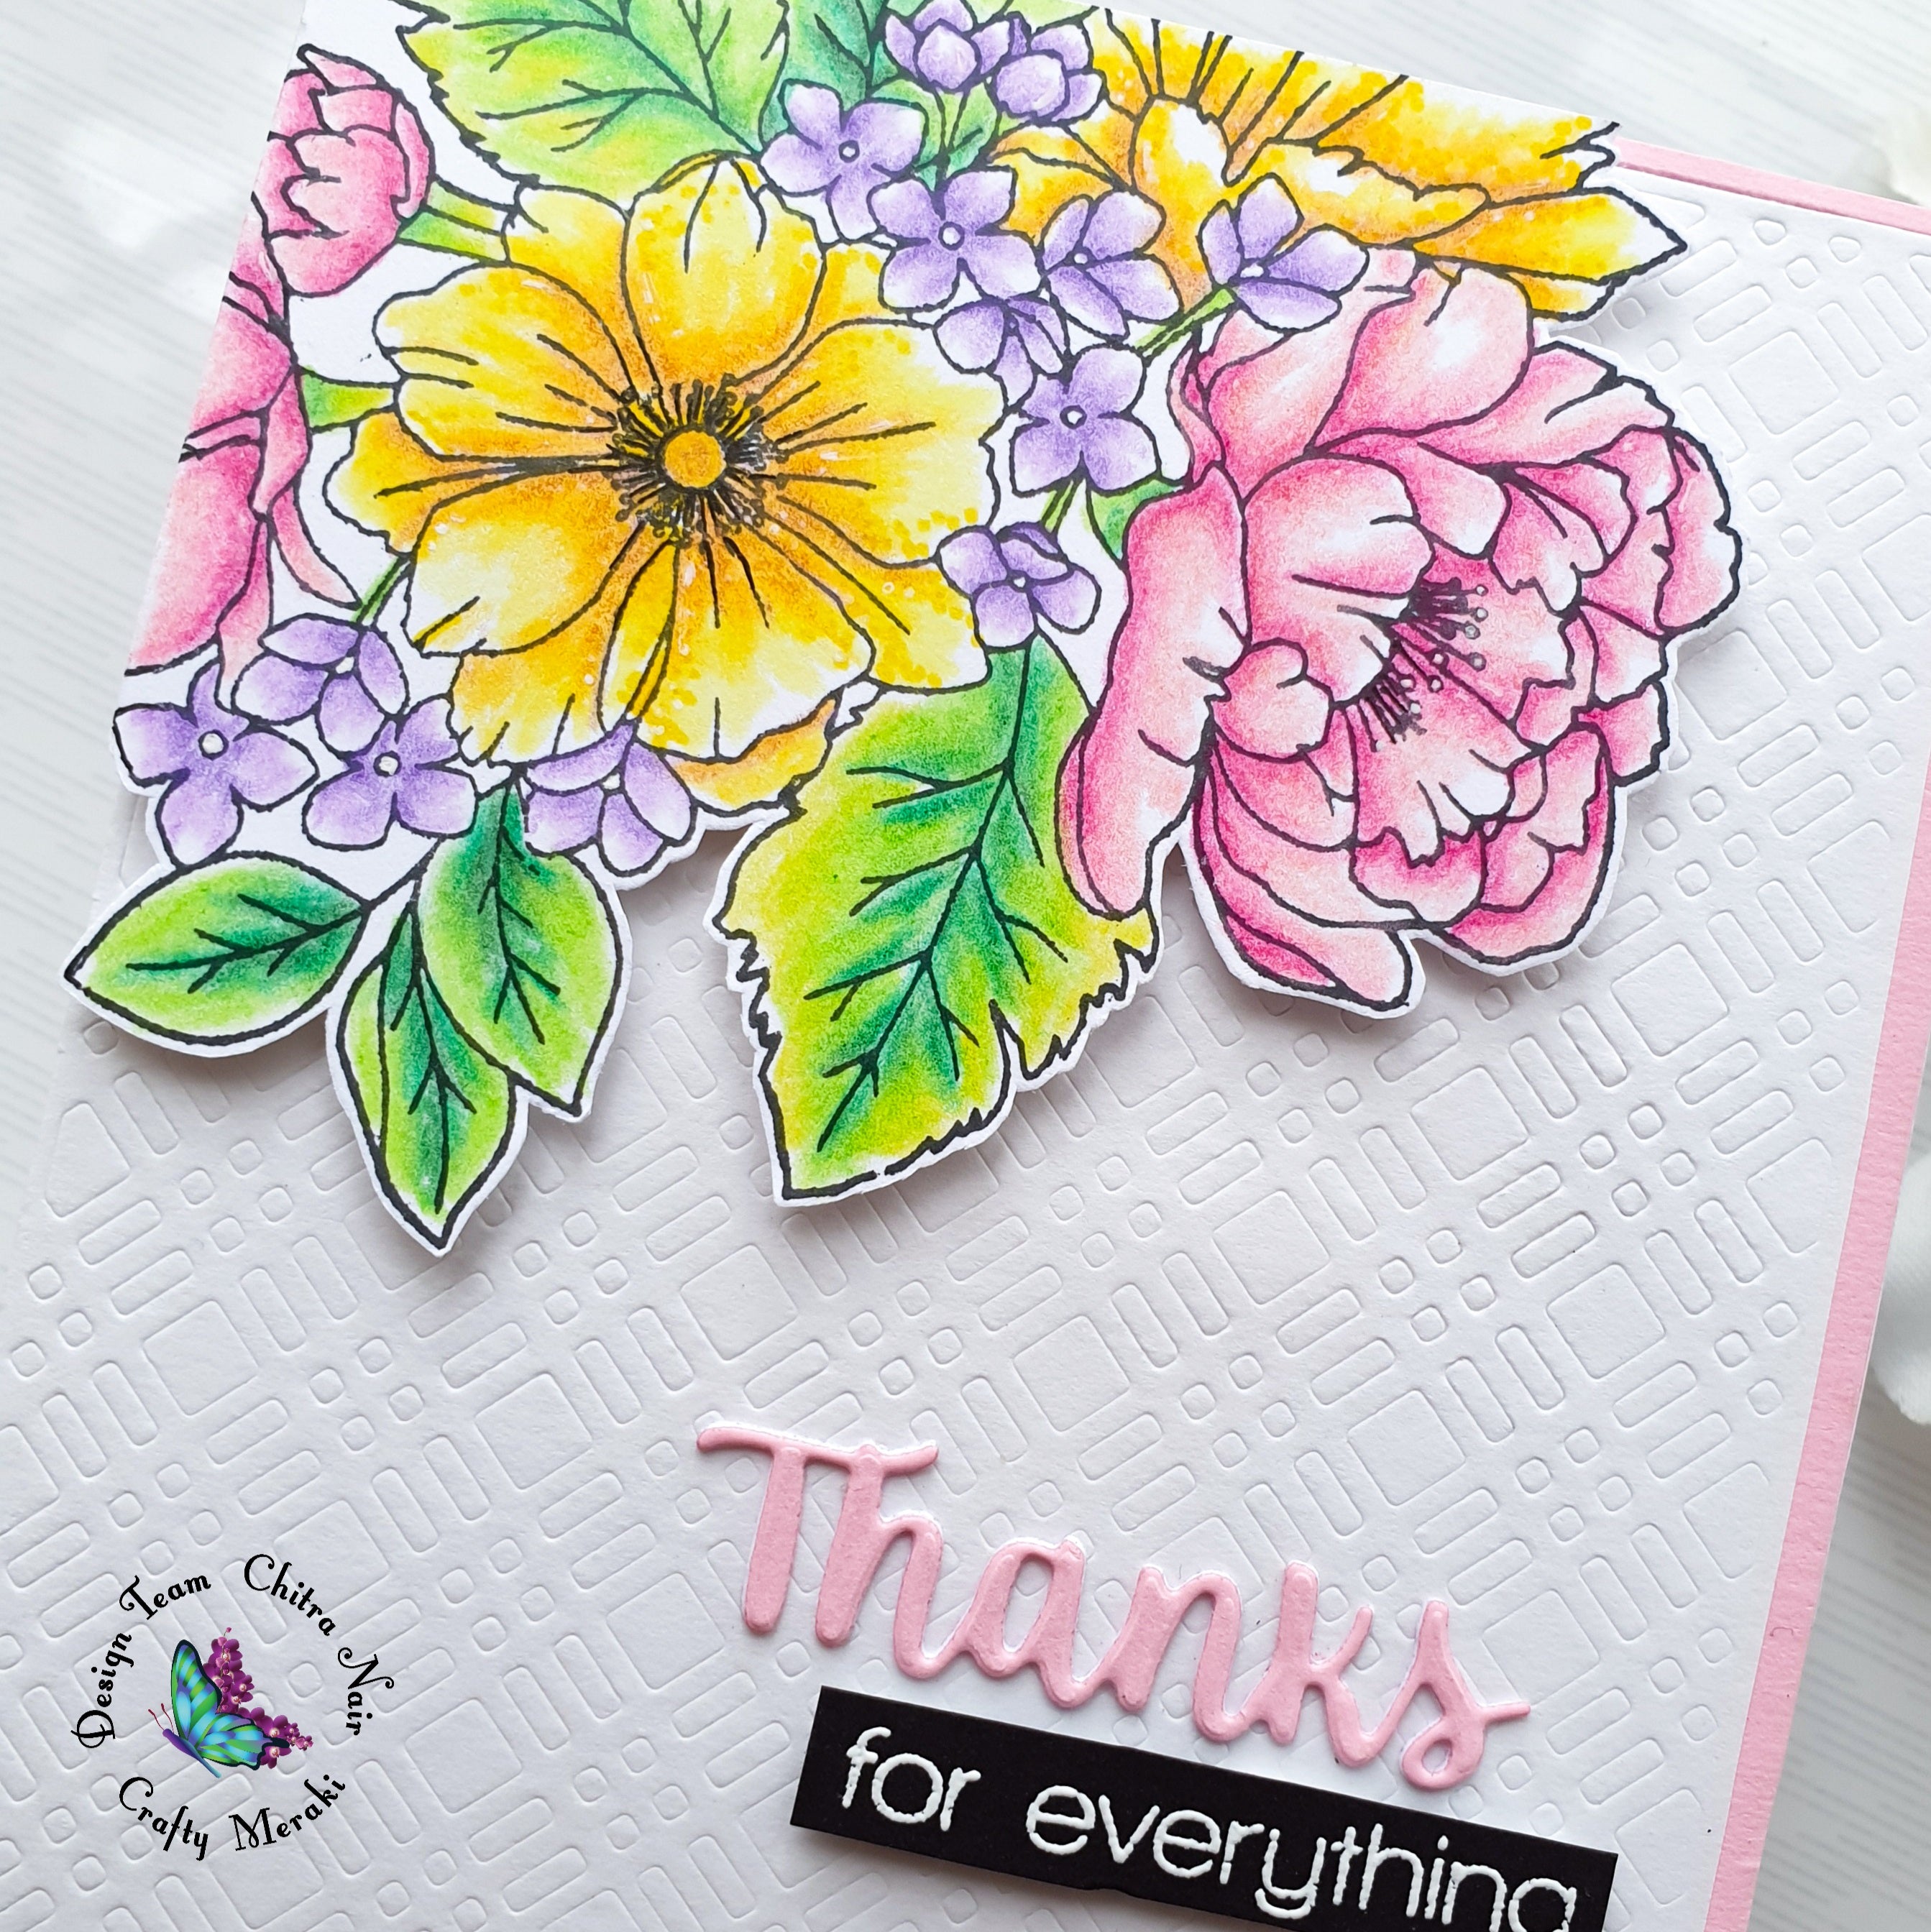 Thanks for everything by Chitra